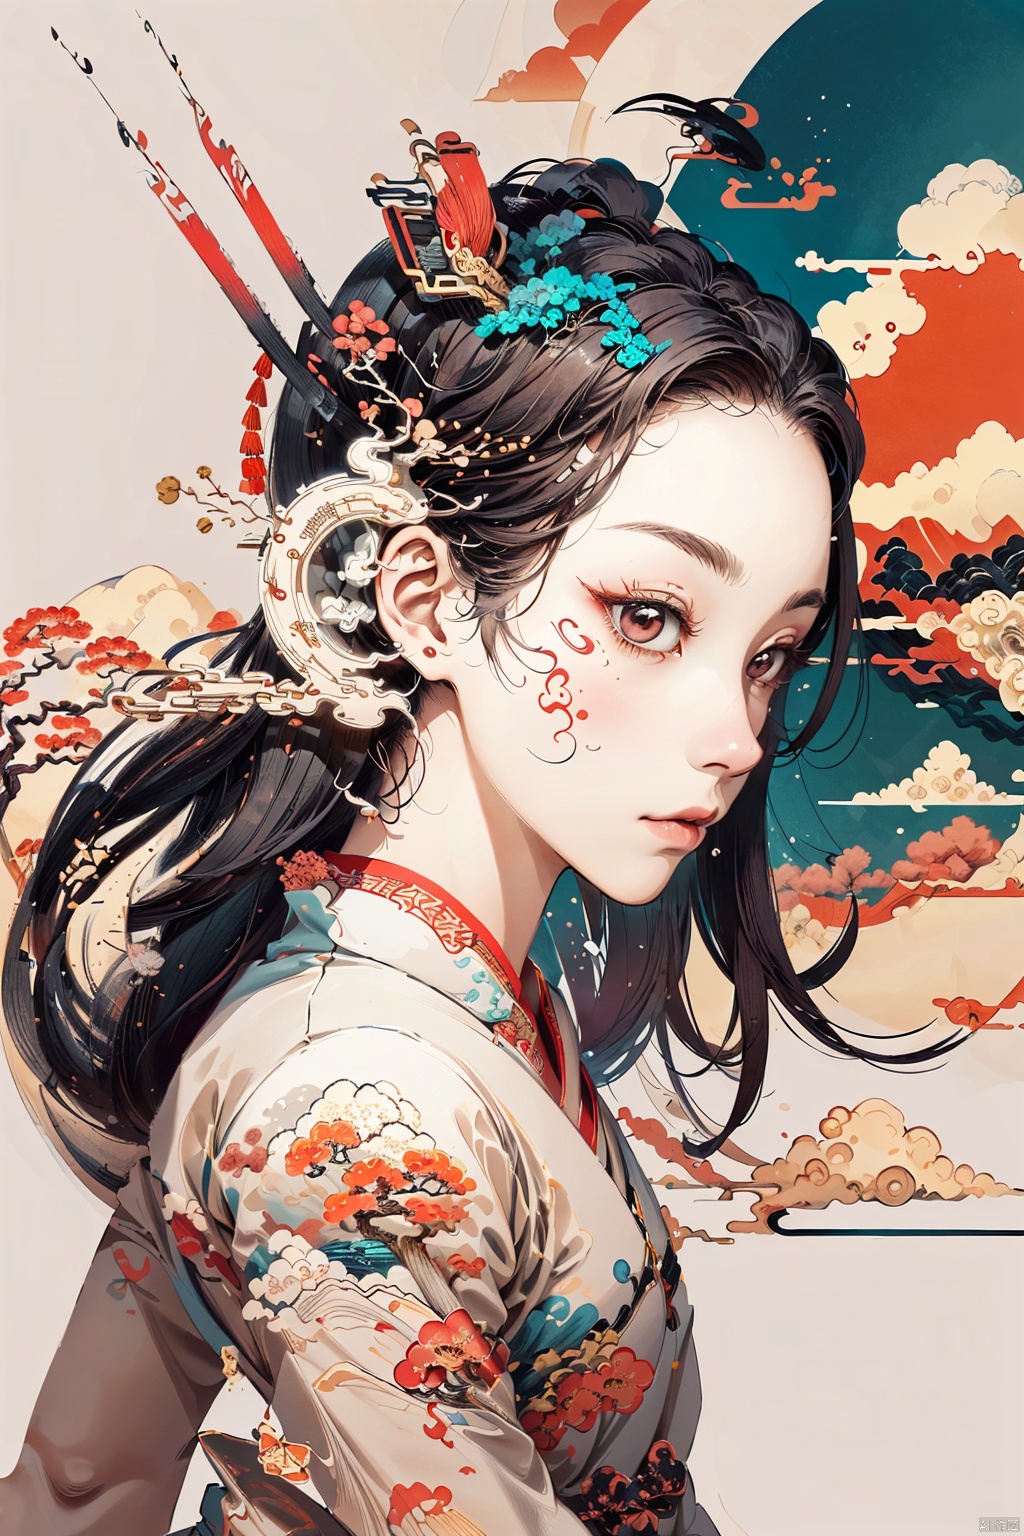  Side profile portrait of a 'Chou' character from traditional Chinese opera, showcasing the unique white patch on the nose and comic expression, reimagined in a simplified geometric style. The character's facial makeup should be portrayed with minimalistic shapes, avoiding the color red and focusing